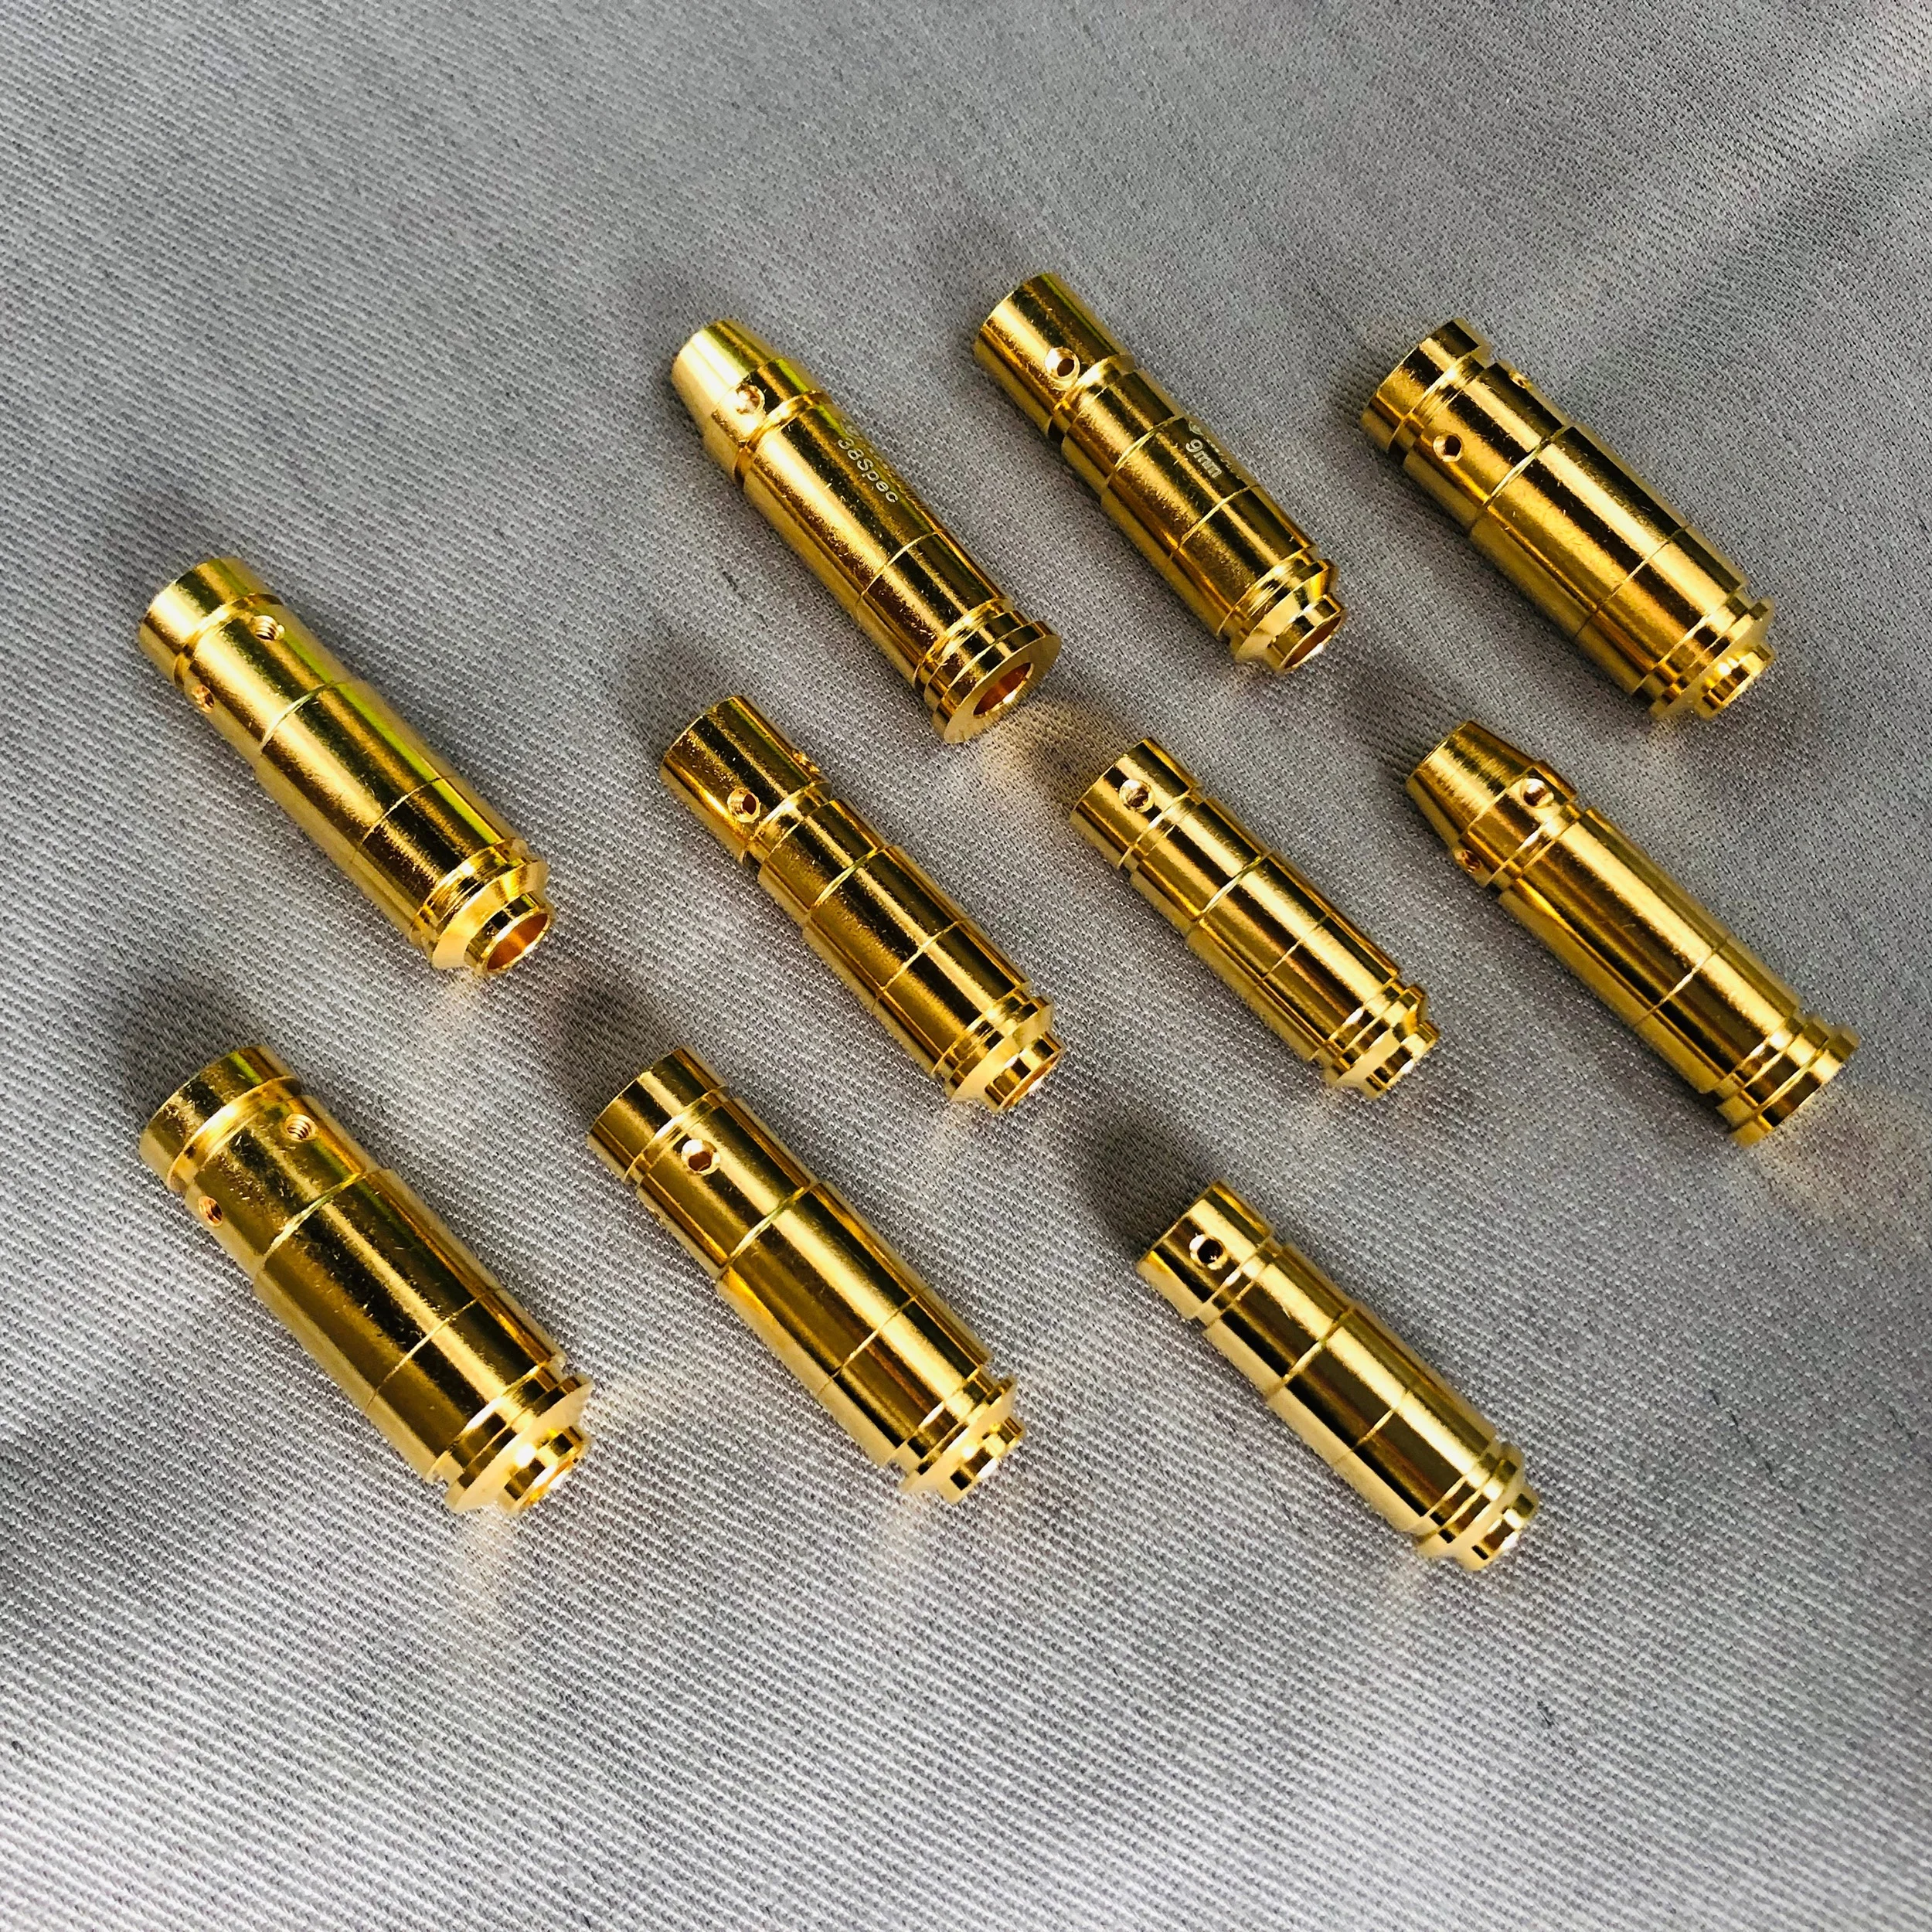 

9mm/380ACP/38Spec/223Rem/40S&W/45ACP/308Win/12Gauge training cartridge laser bullet for electronic target shooting simulation